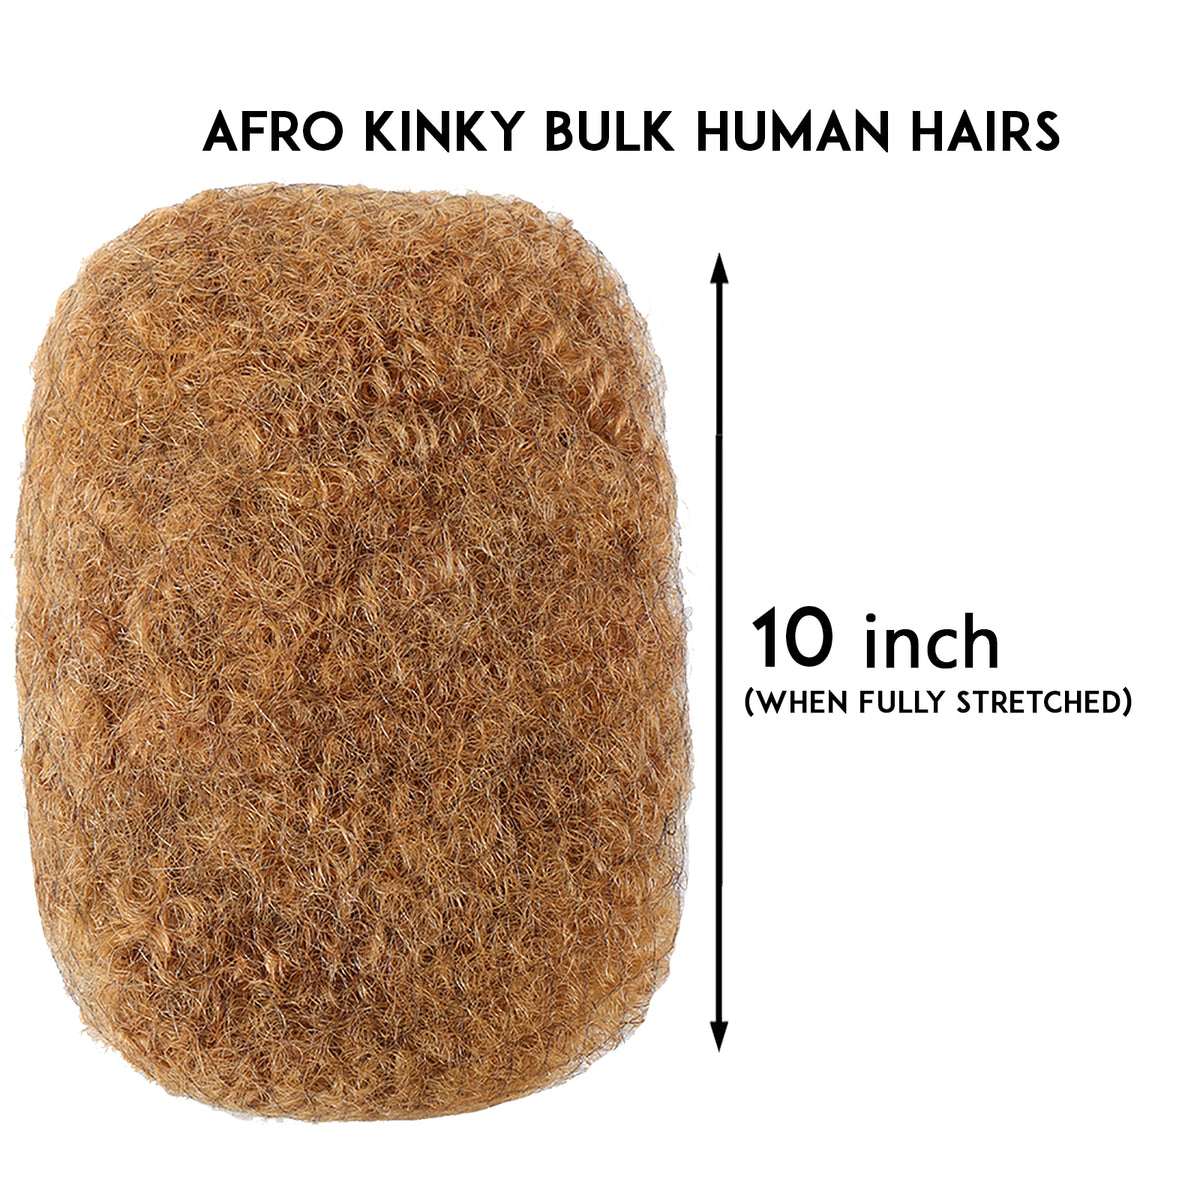 Afro Kinky Human Hairs For Making,Repairing & Bulking Locs 10 Inch Long Afro Kinky Bulk Human Hair For Dreadlock Extensions 100% Natural Afro Hairs For Twisting & Braiding 29g/1Oz (27/ Honey Blonde, 10 inch)